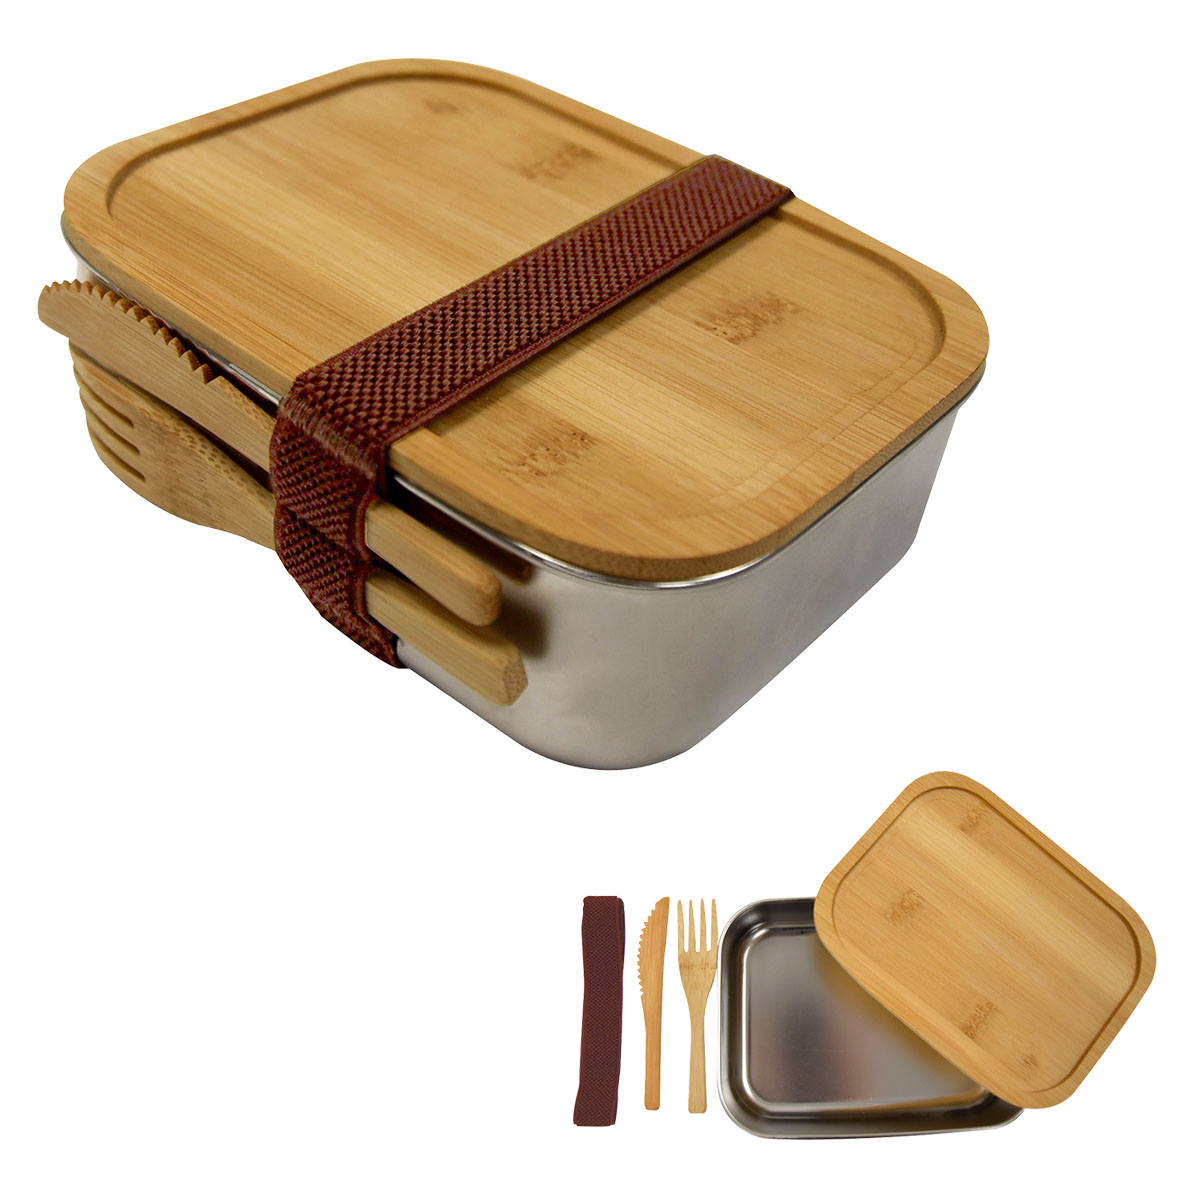 75004 Sophisticate Stainless & Bamboo Bento Box - Hit Promotional Products